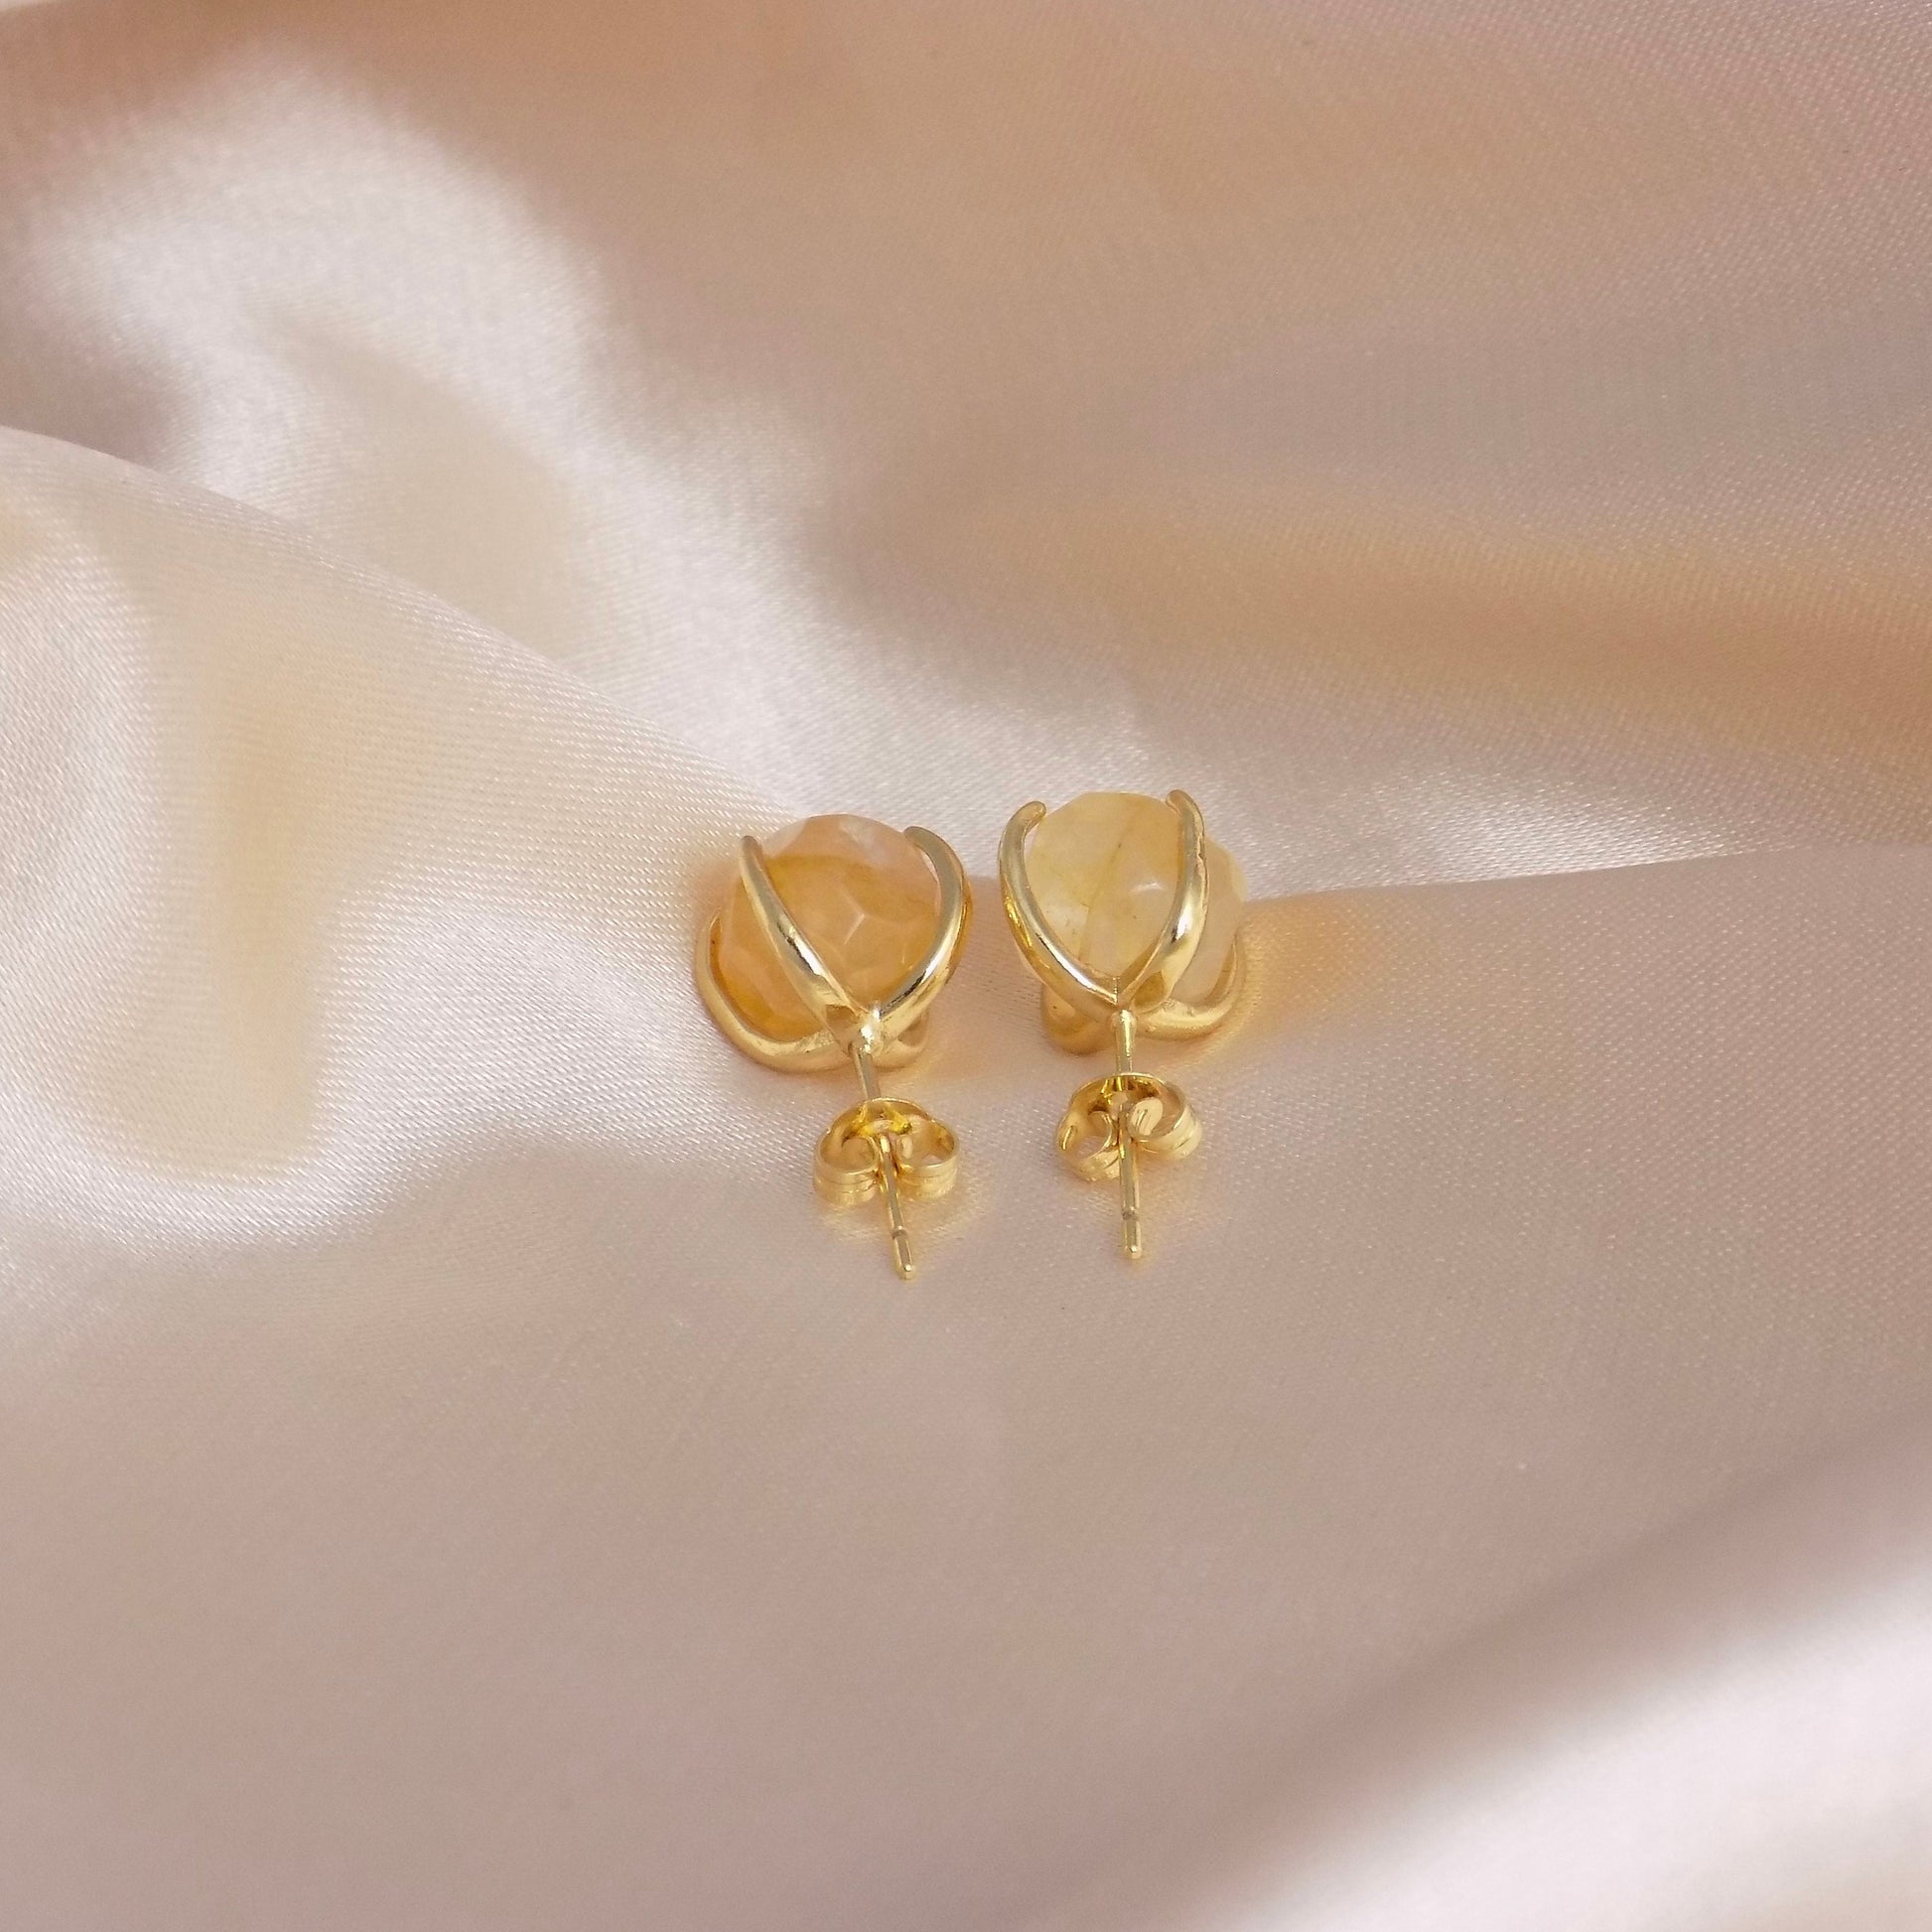 Raw Citrine Crystal Earrings Studs Gold, Yellow Brown Gemstone, Gifts for Mom, M6-768